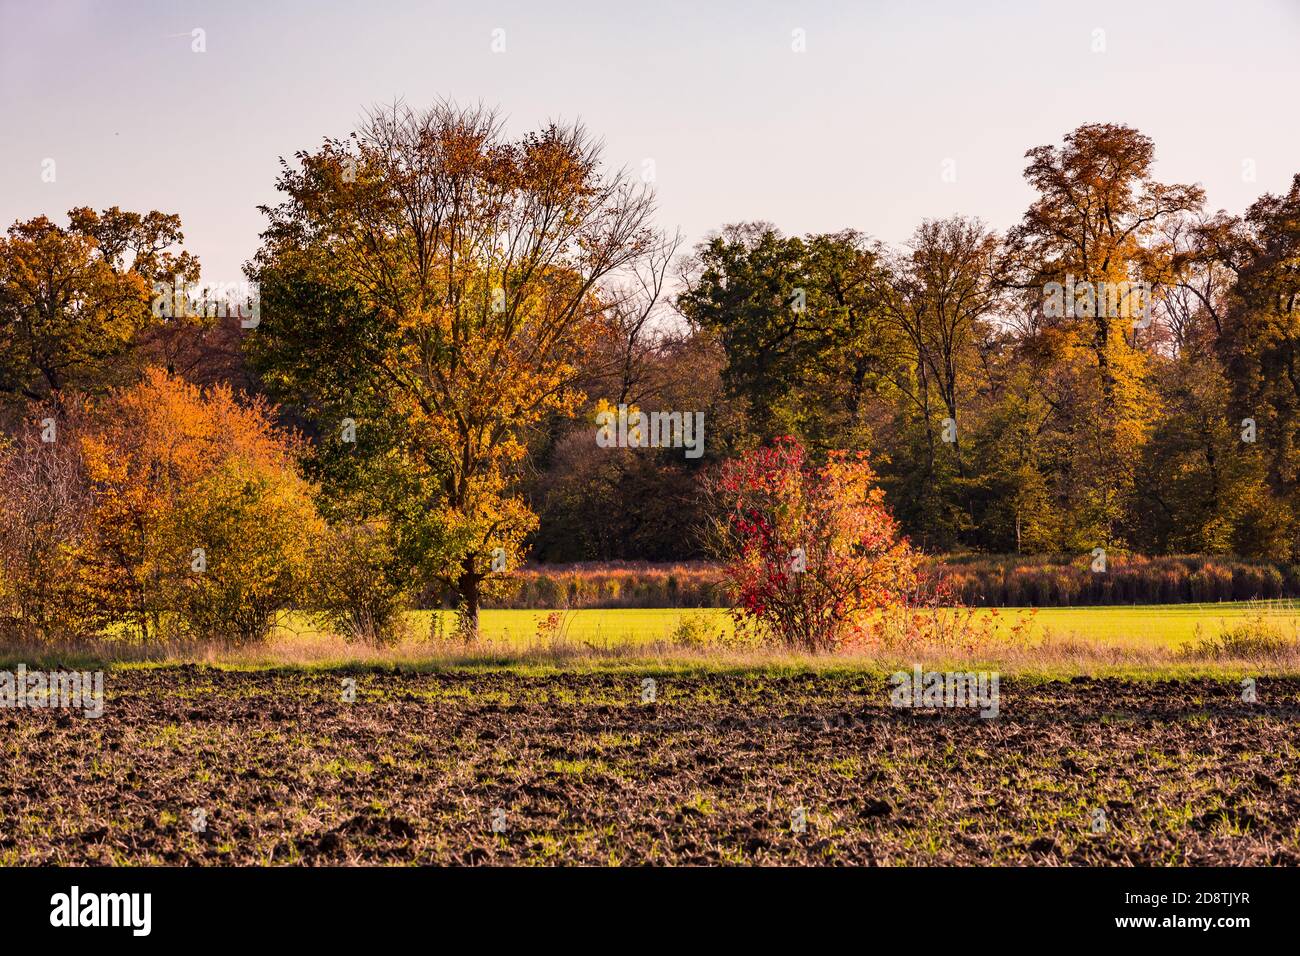 The lonely nature with many colored leaves on the ground in an autumn mood in Germany Stock Photo